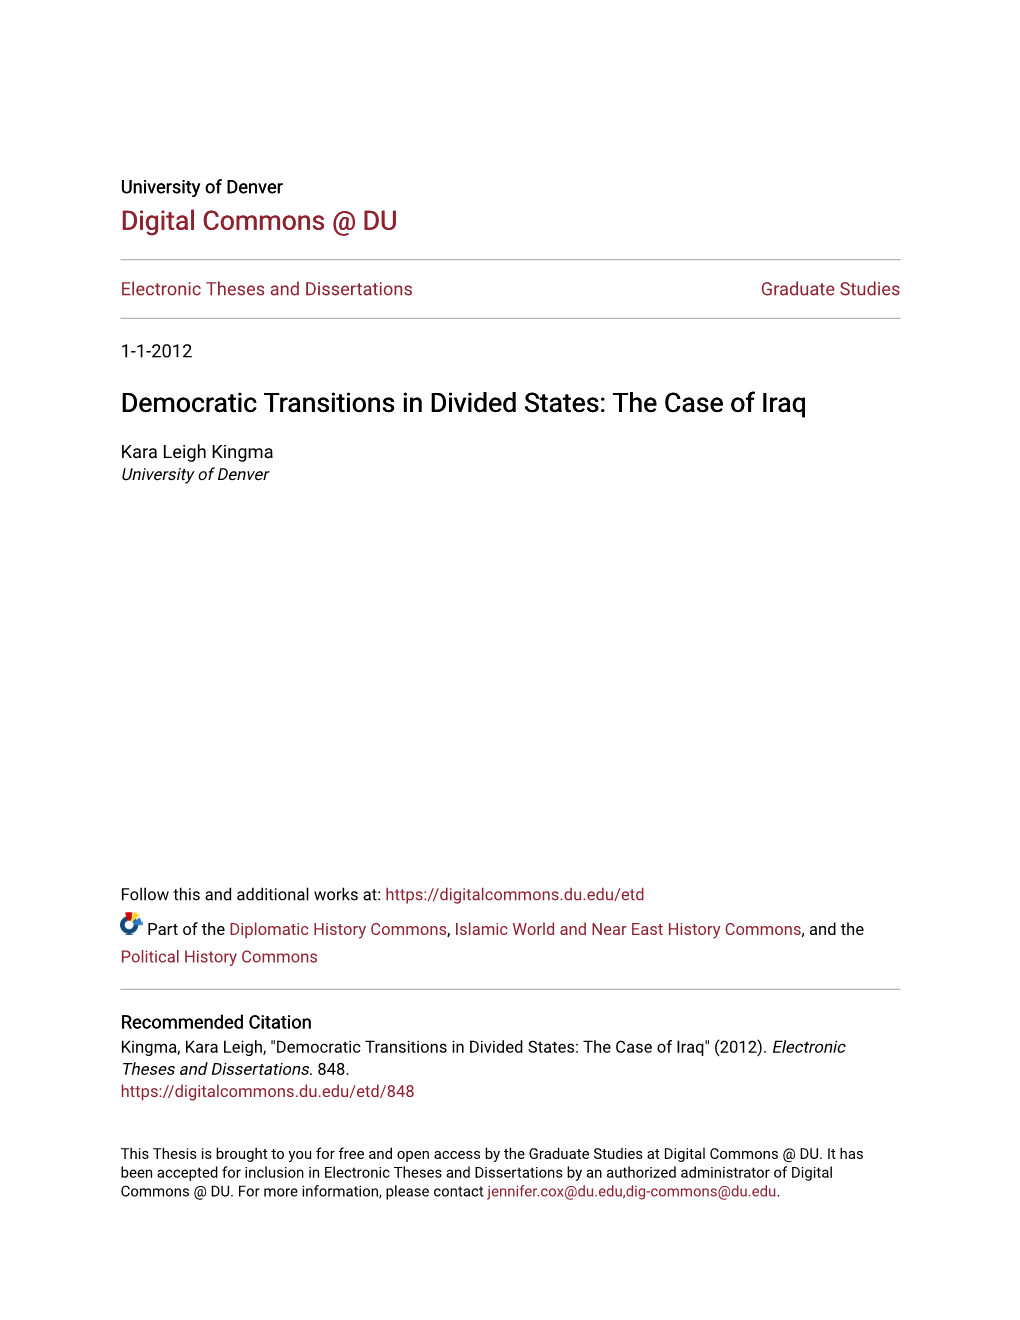 Democratic Transitions in Divided States: the Case of Iraq